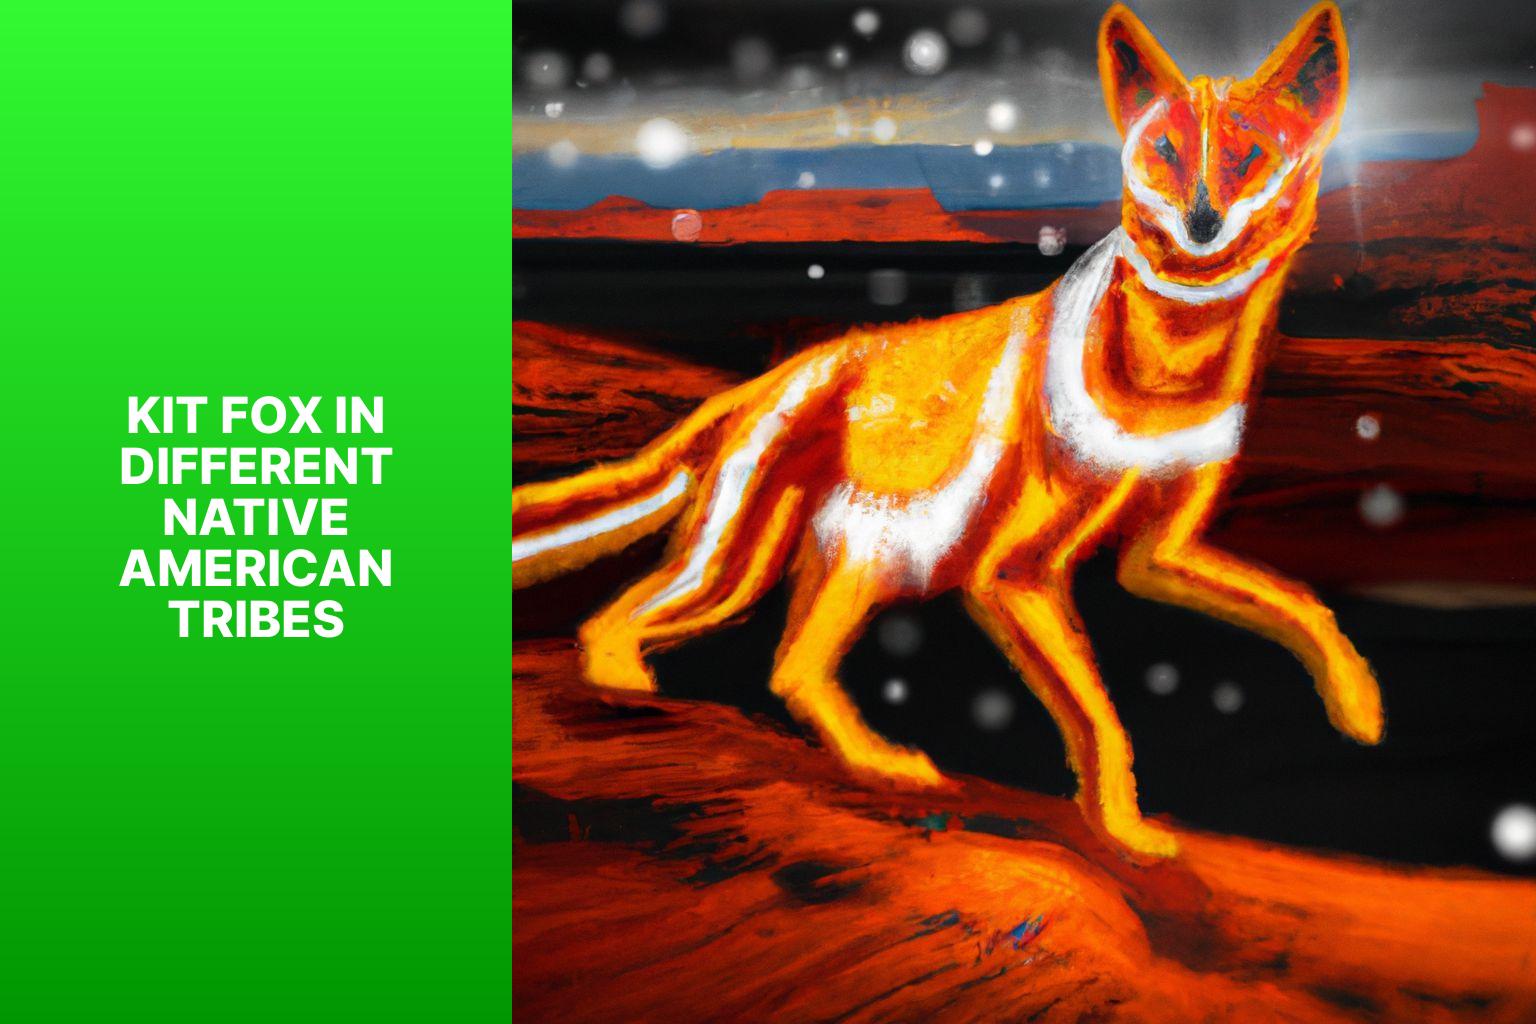 Kit Fox in Different Native American Tribes - Kit Fox in Native American Lore 